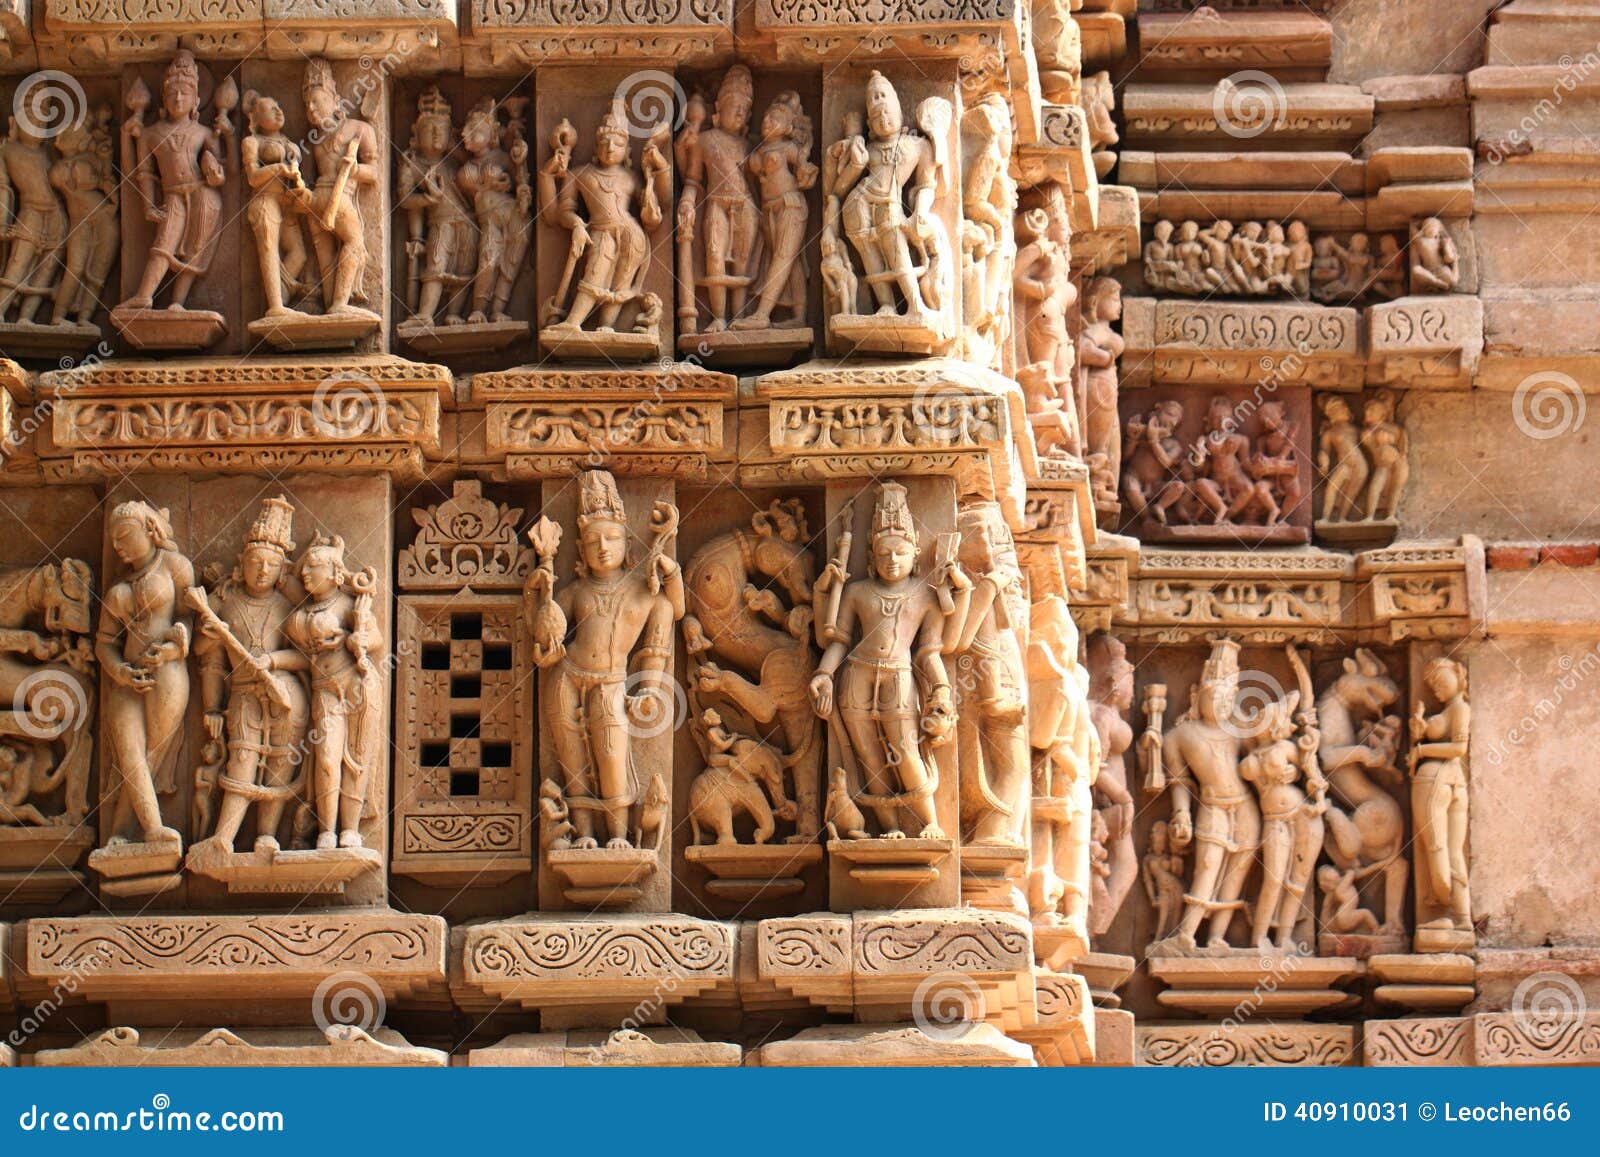 Khajuraho Temples And Their Erotic Sculptures India Stock Image Image Of Sandstone 